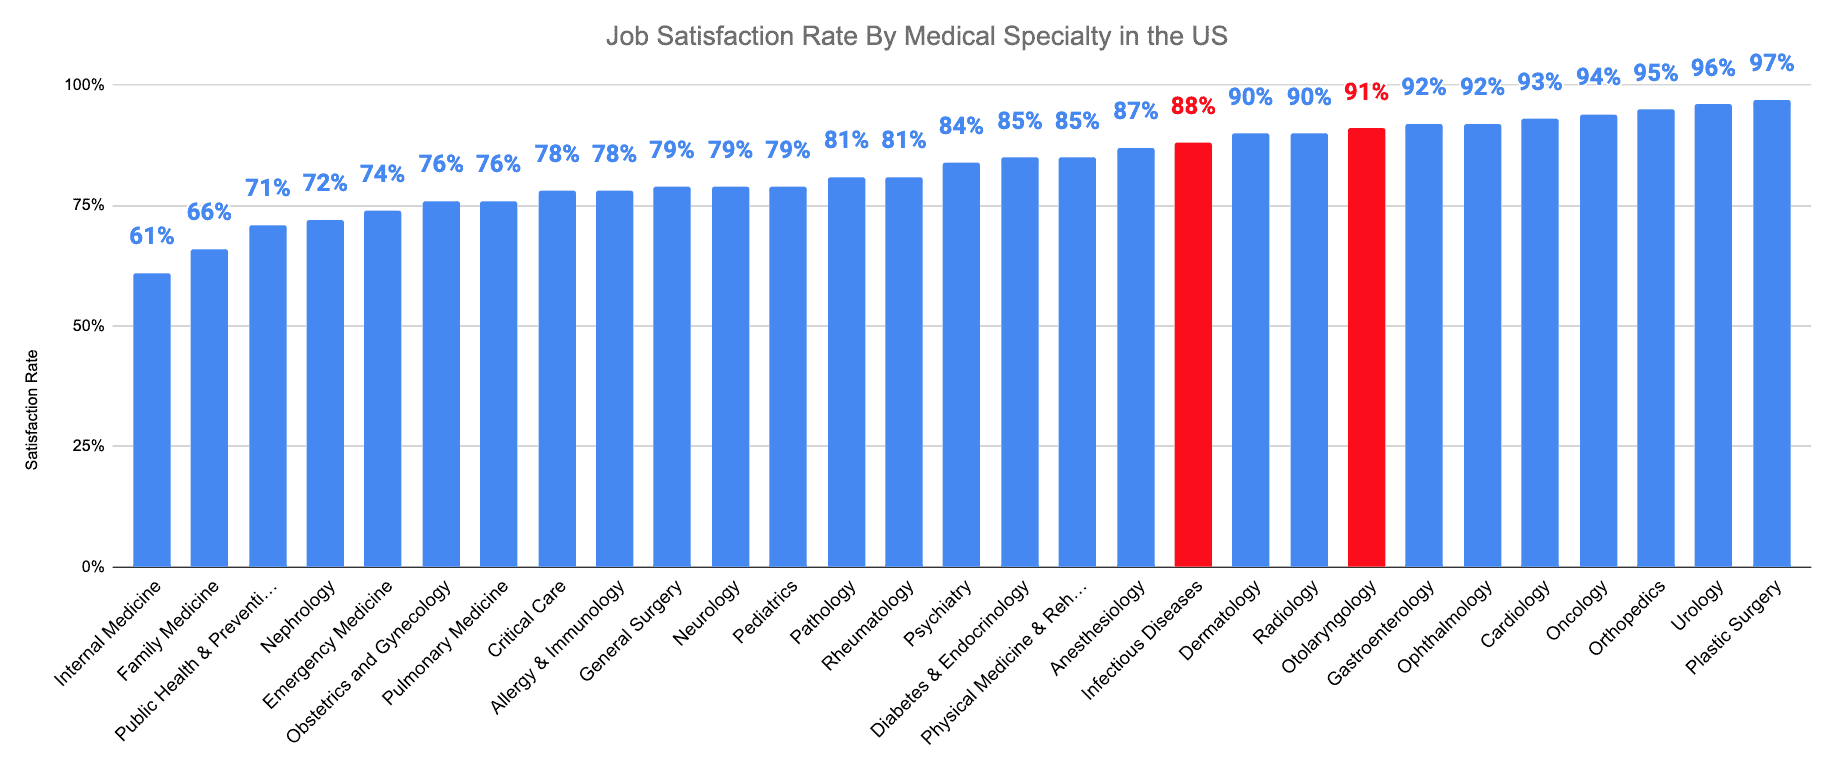 Otolaryngology vs. Infectious Disease Job Satisfaction Rate By Medical Specialty in the US